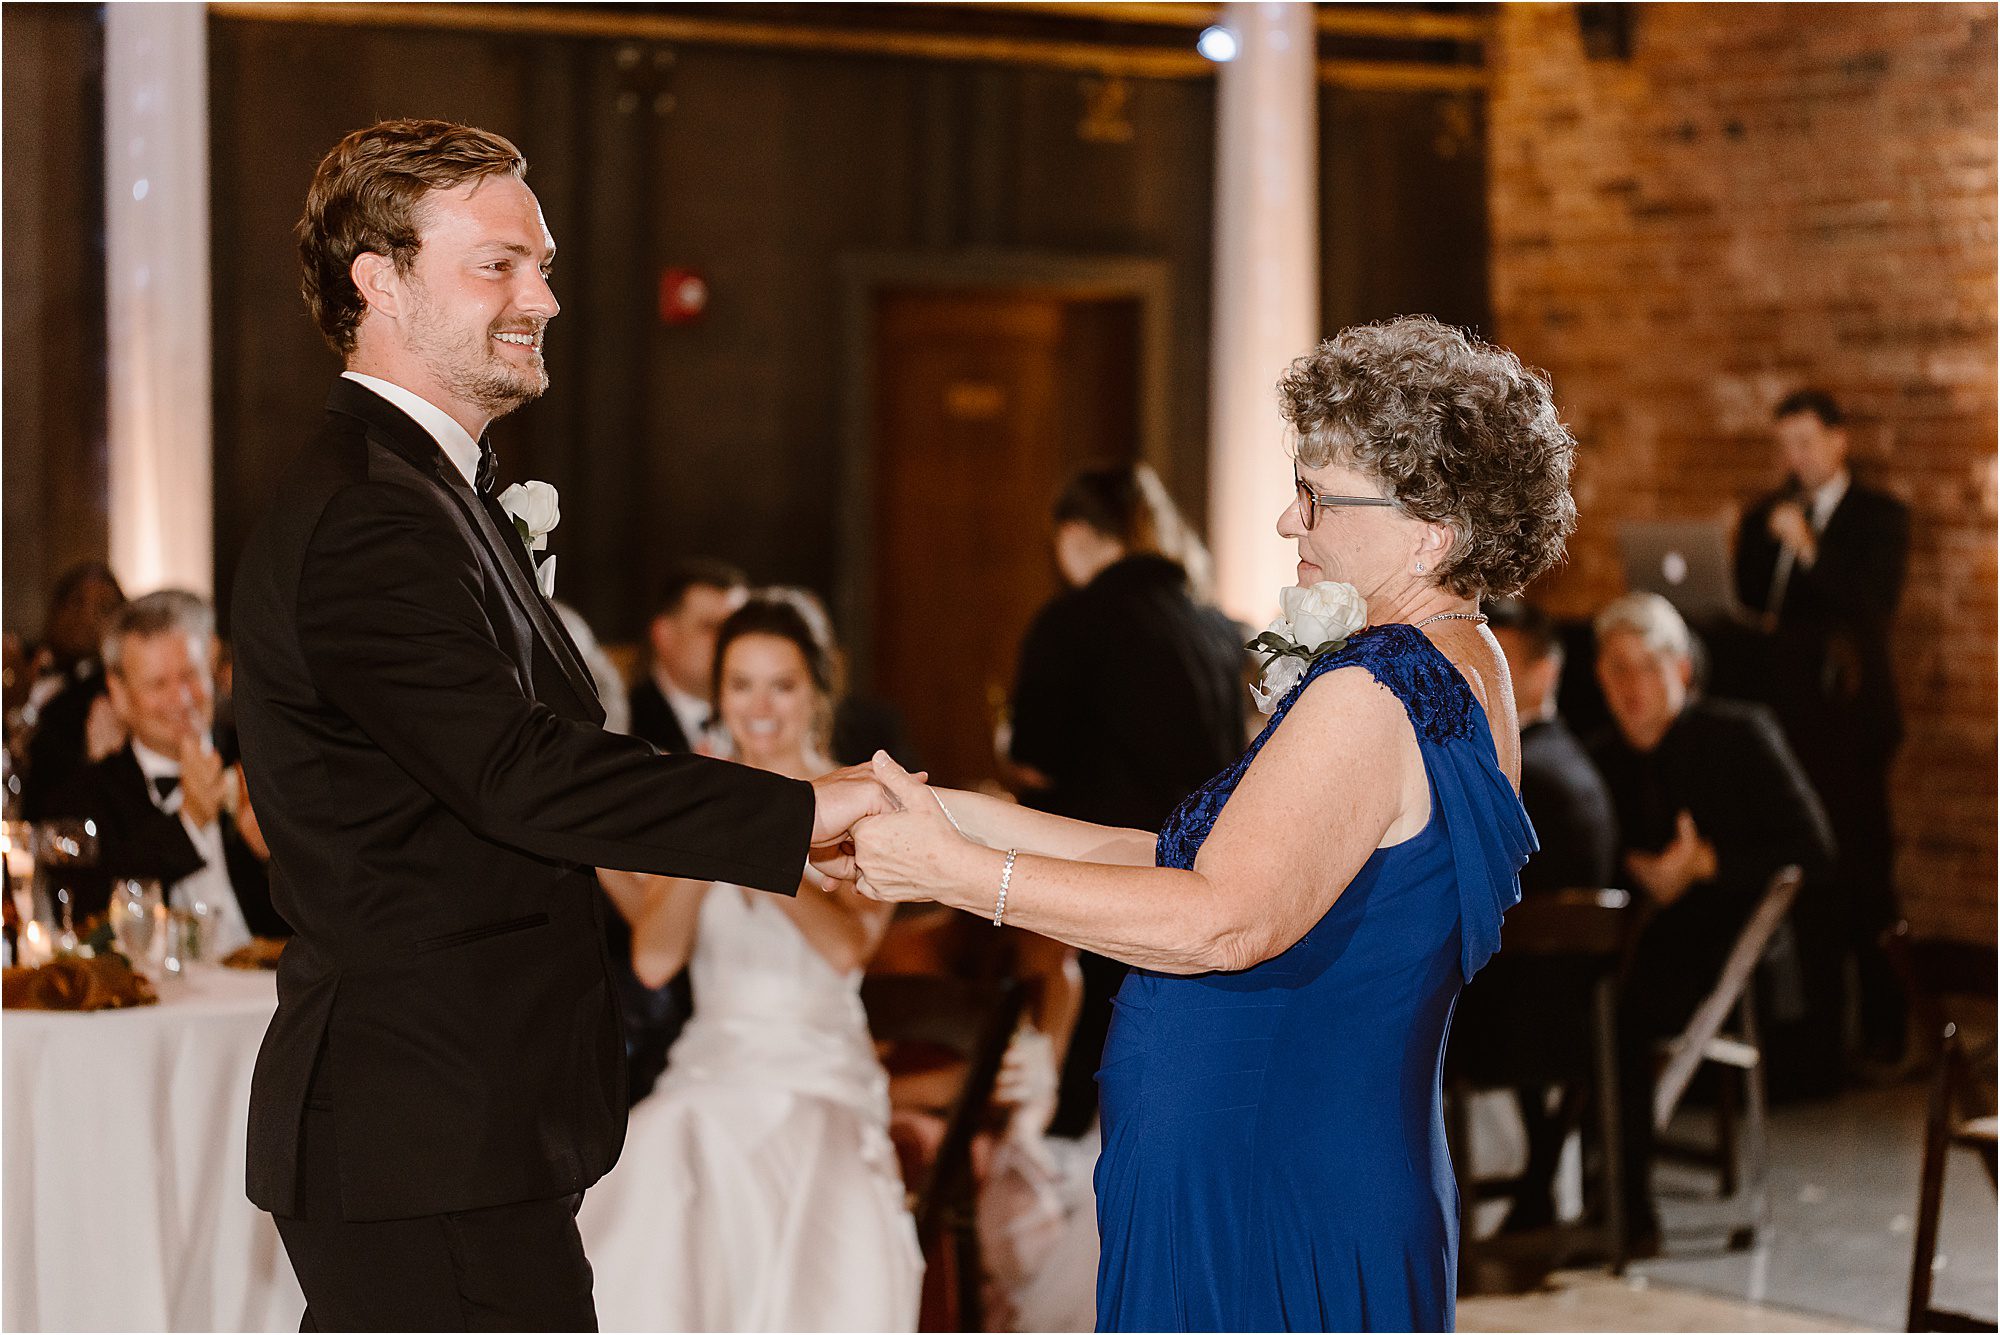 groom and mother dance at wedding ceremony